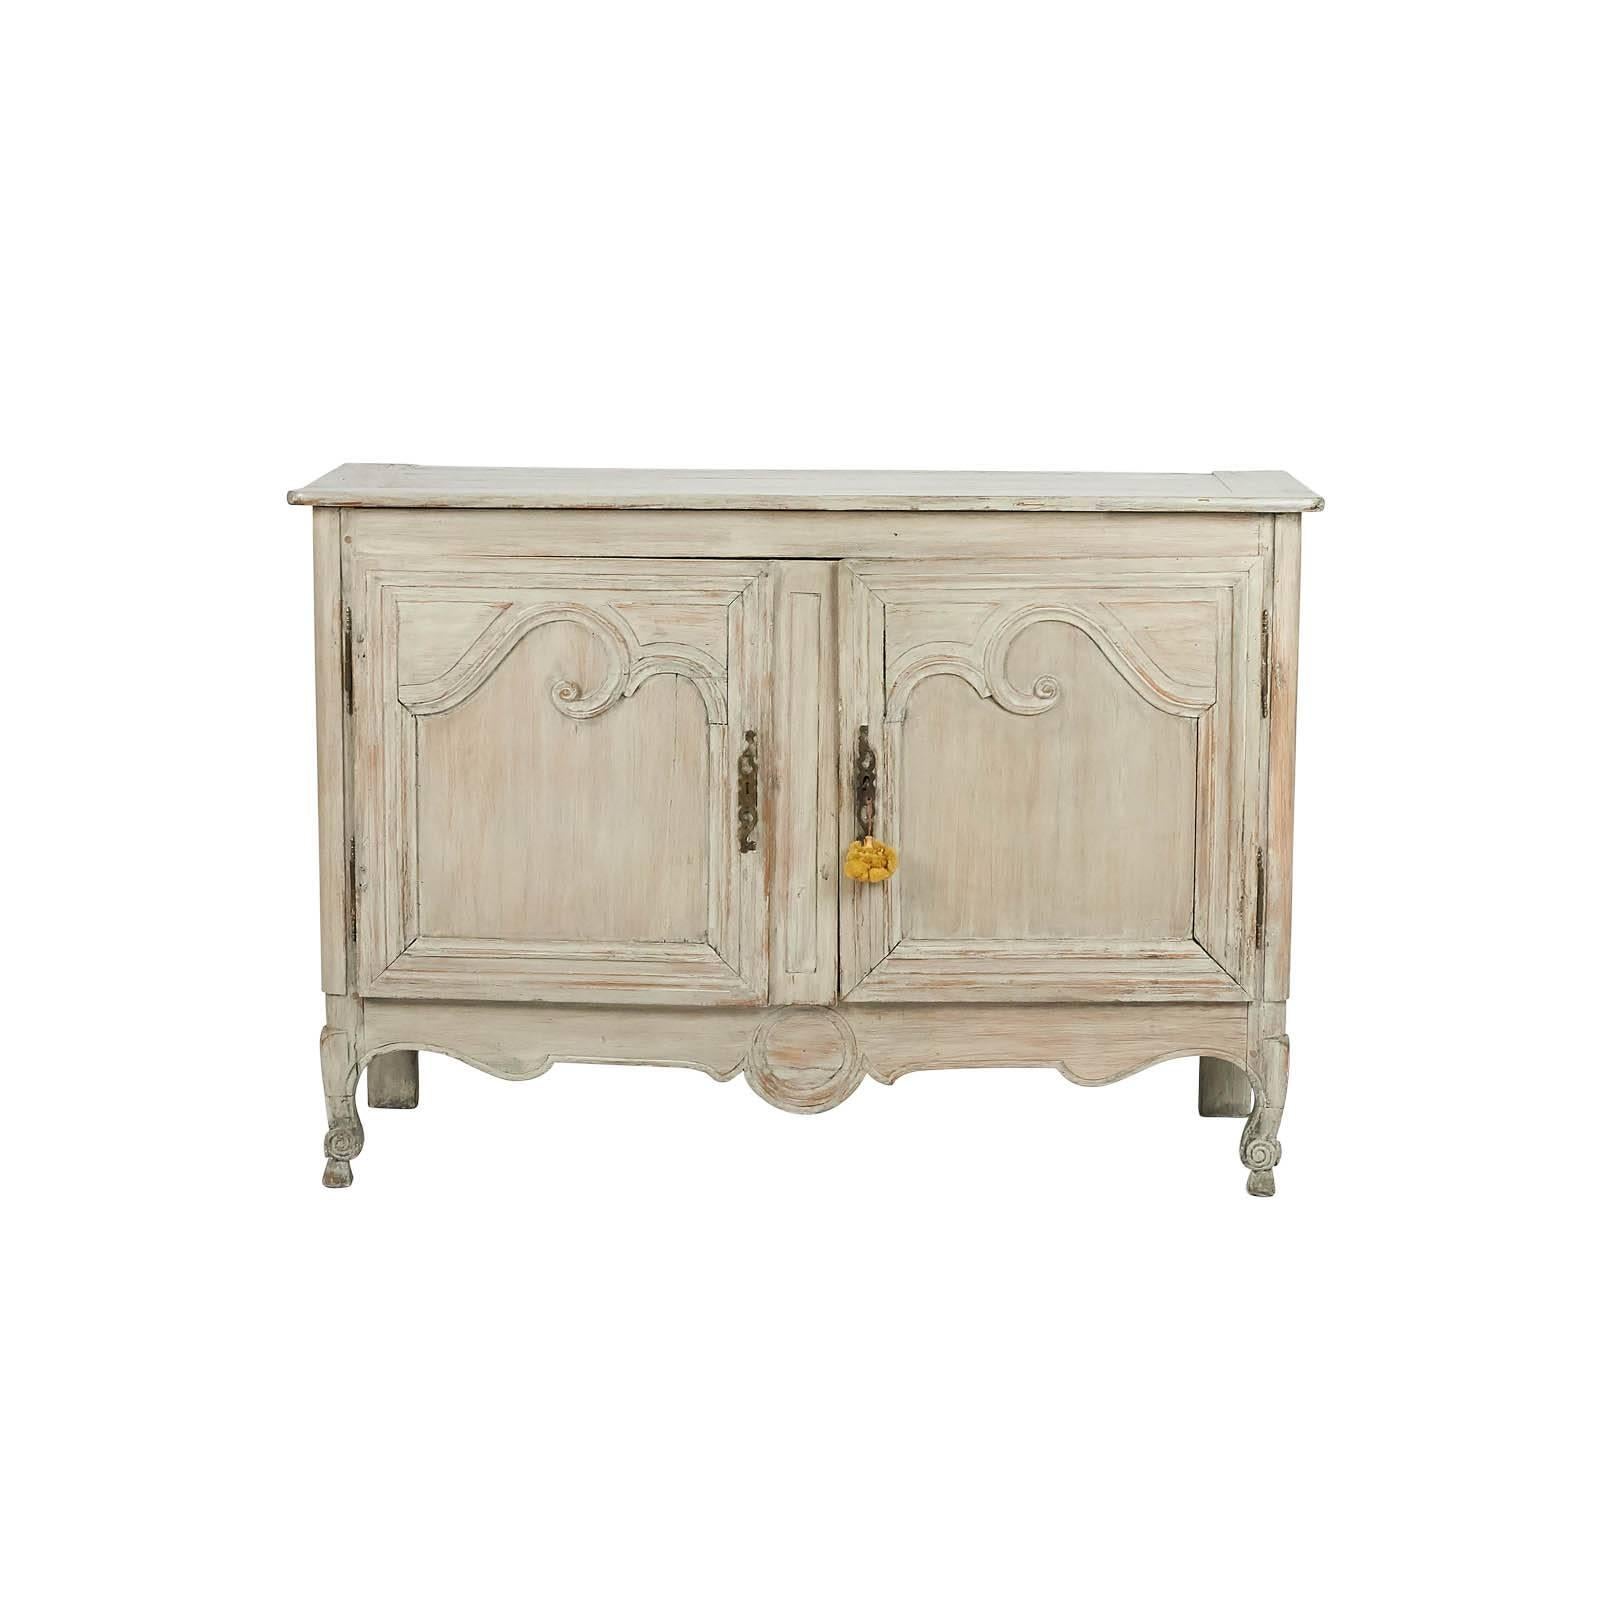 An early 19th Century French Louis XVI grey painted buffet – cabinet, circa 1800.

